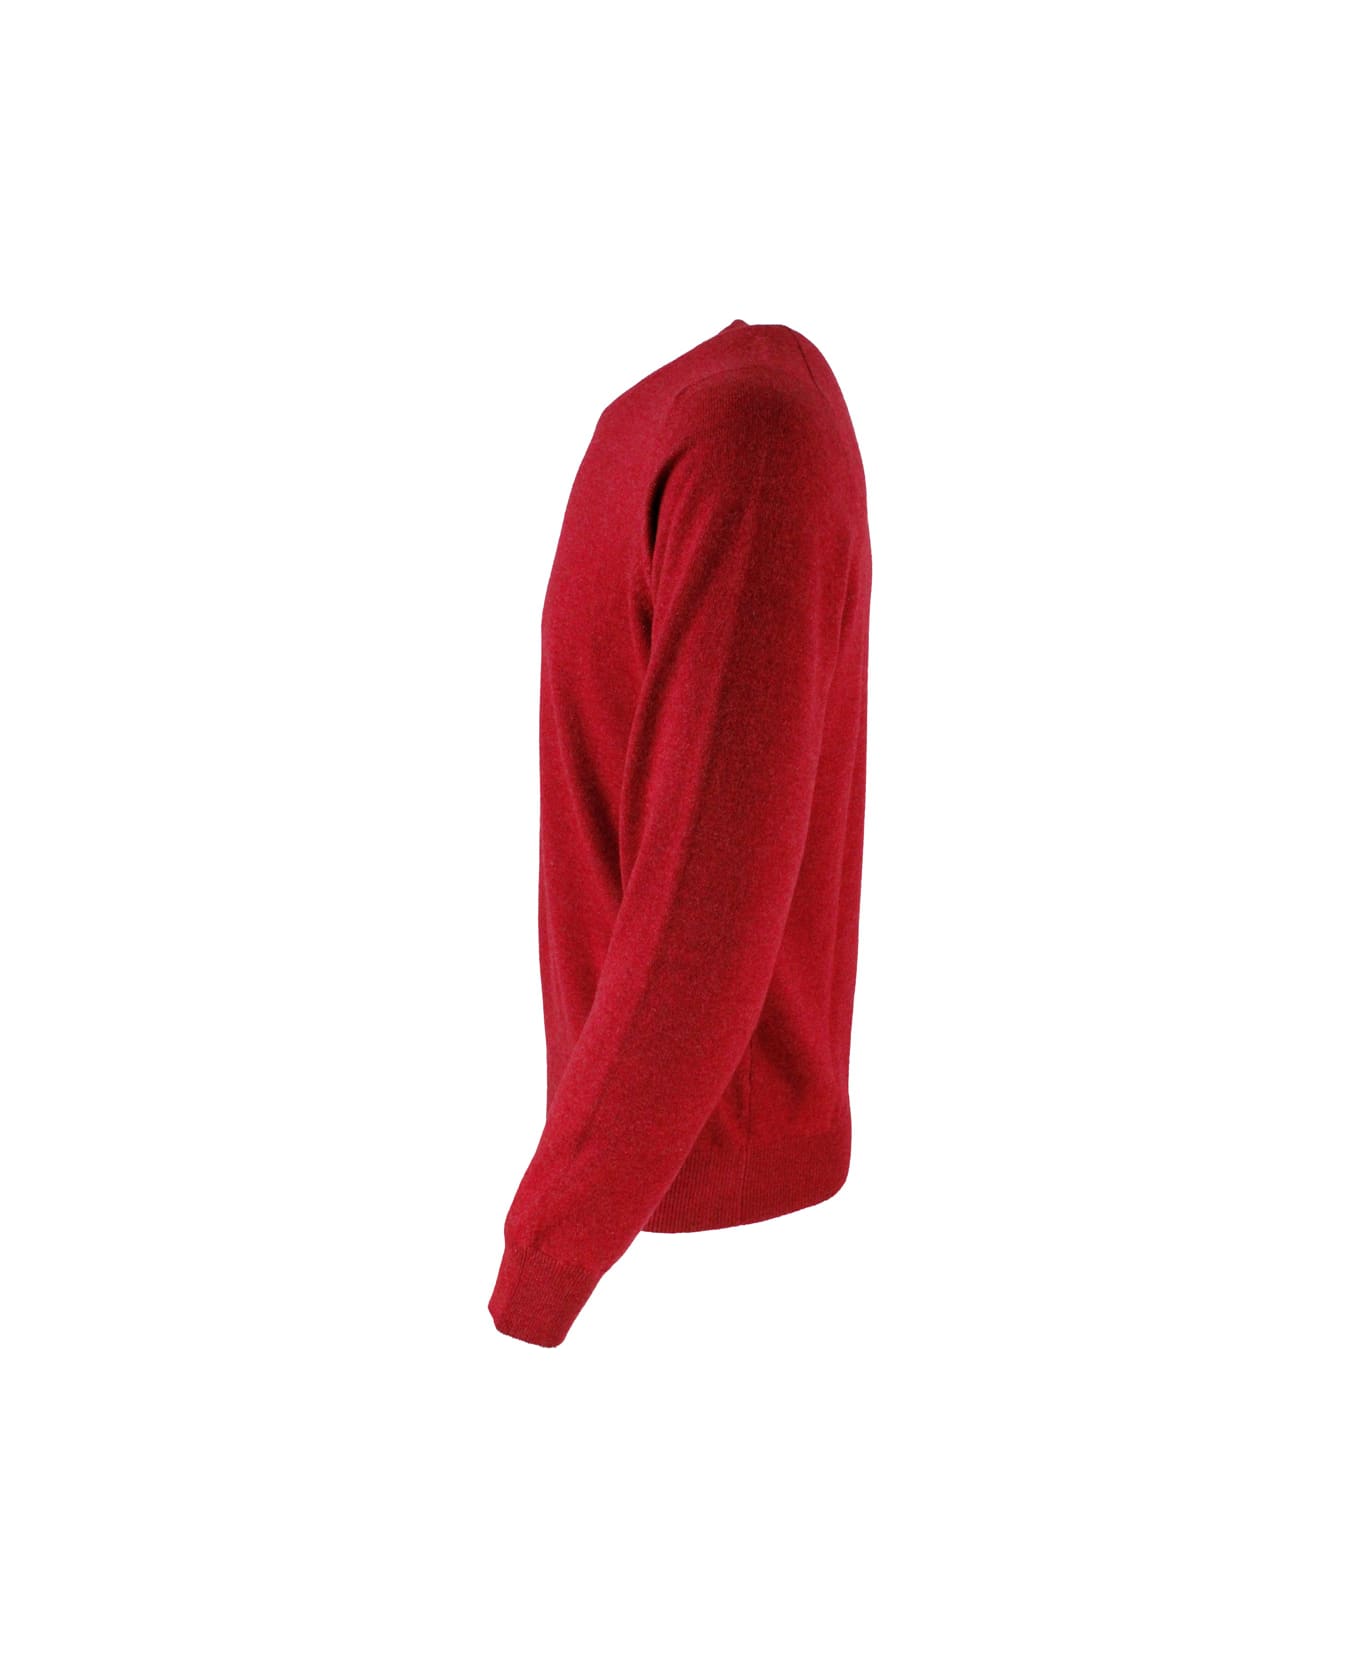 Brunello Cucinelli Cashmere Crewneck Sweater With Contrasting Profile - Red ニットウェア